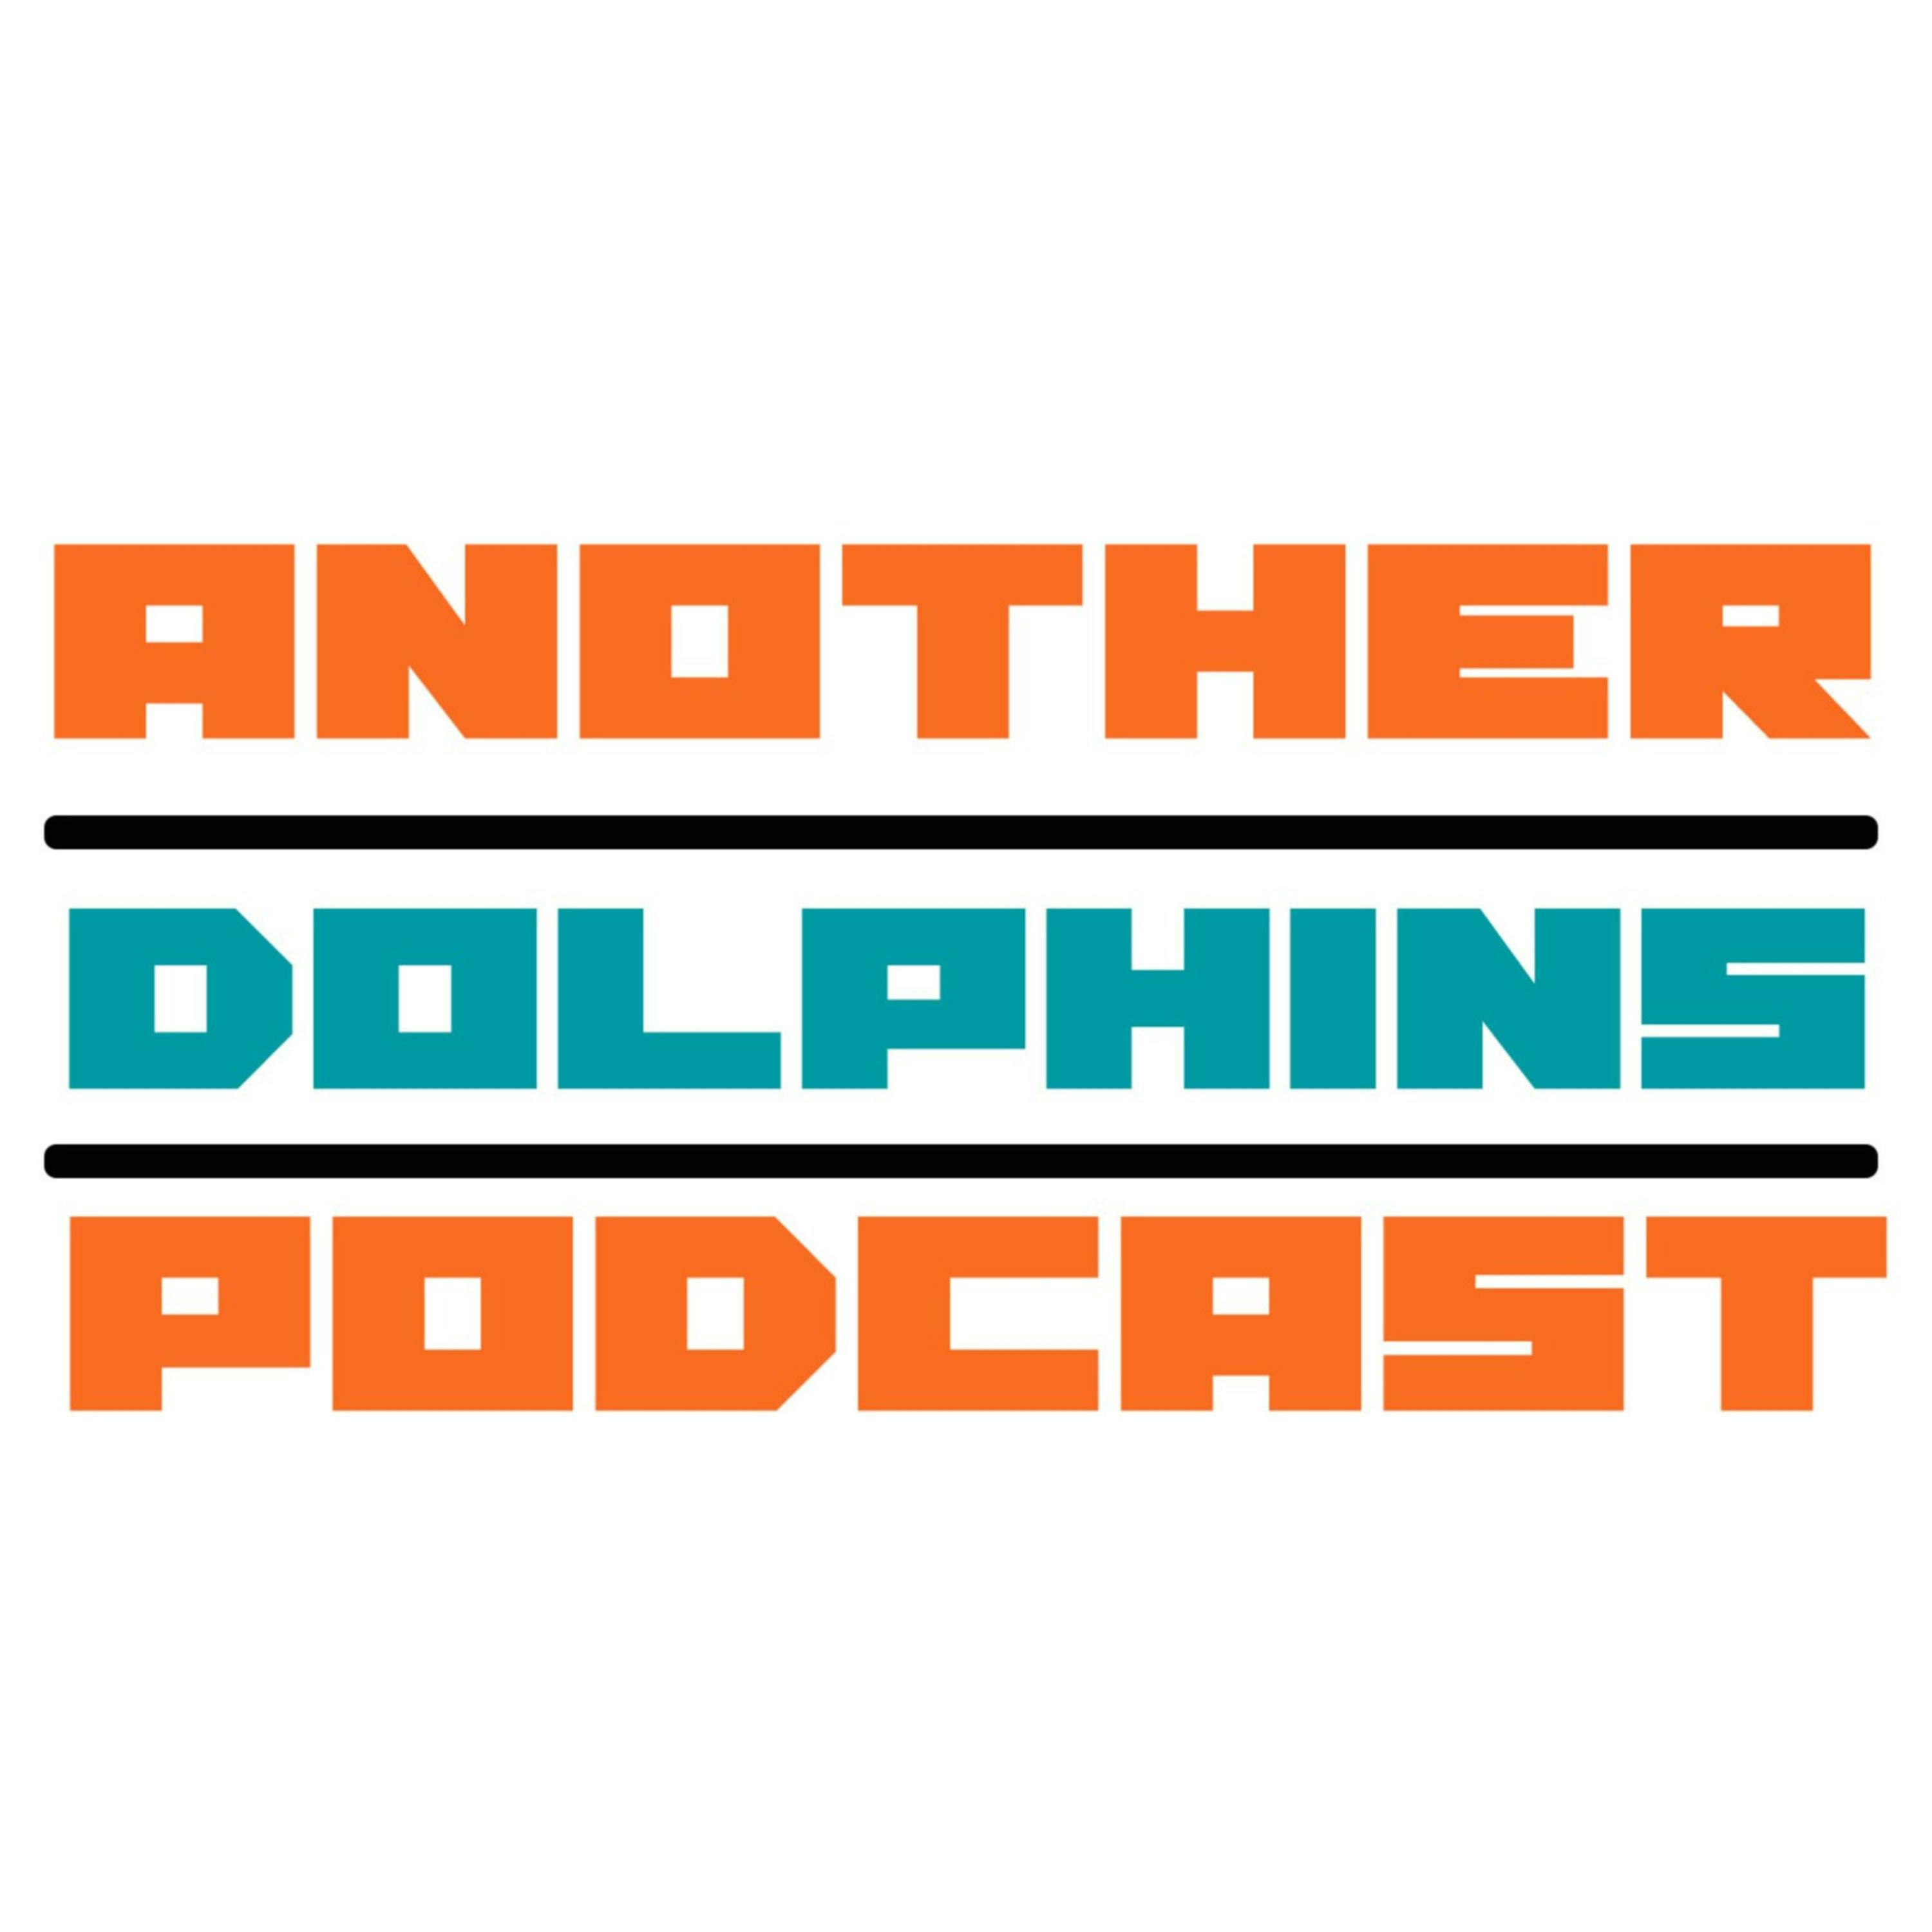 Into the Metaverse! Let's get down to the details about Miami's offensive line